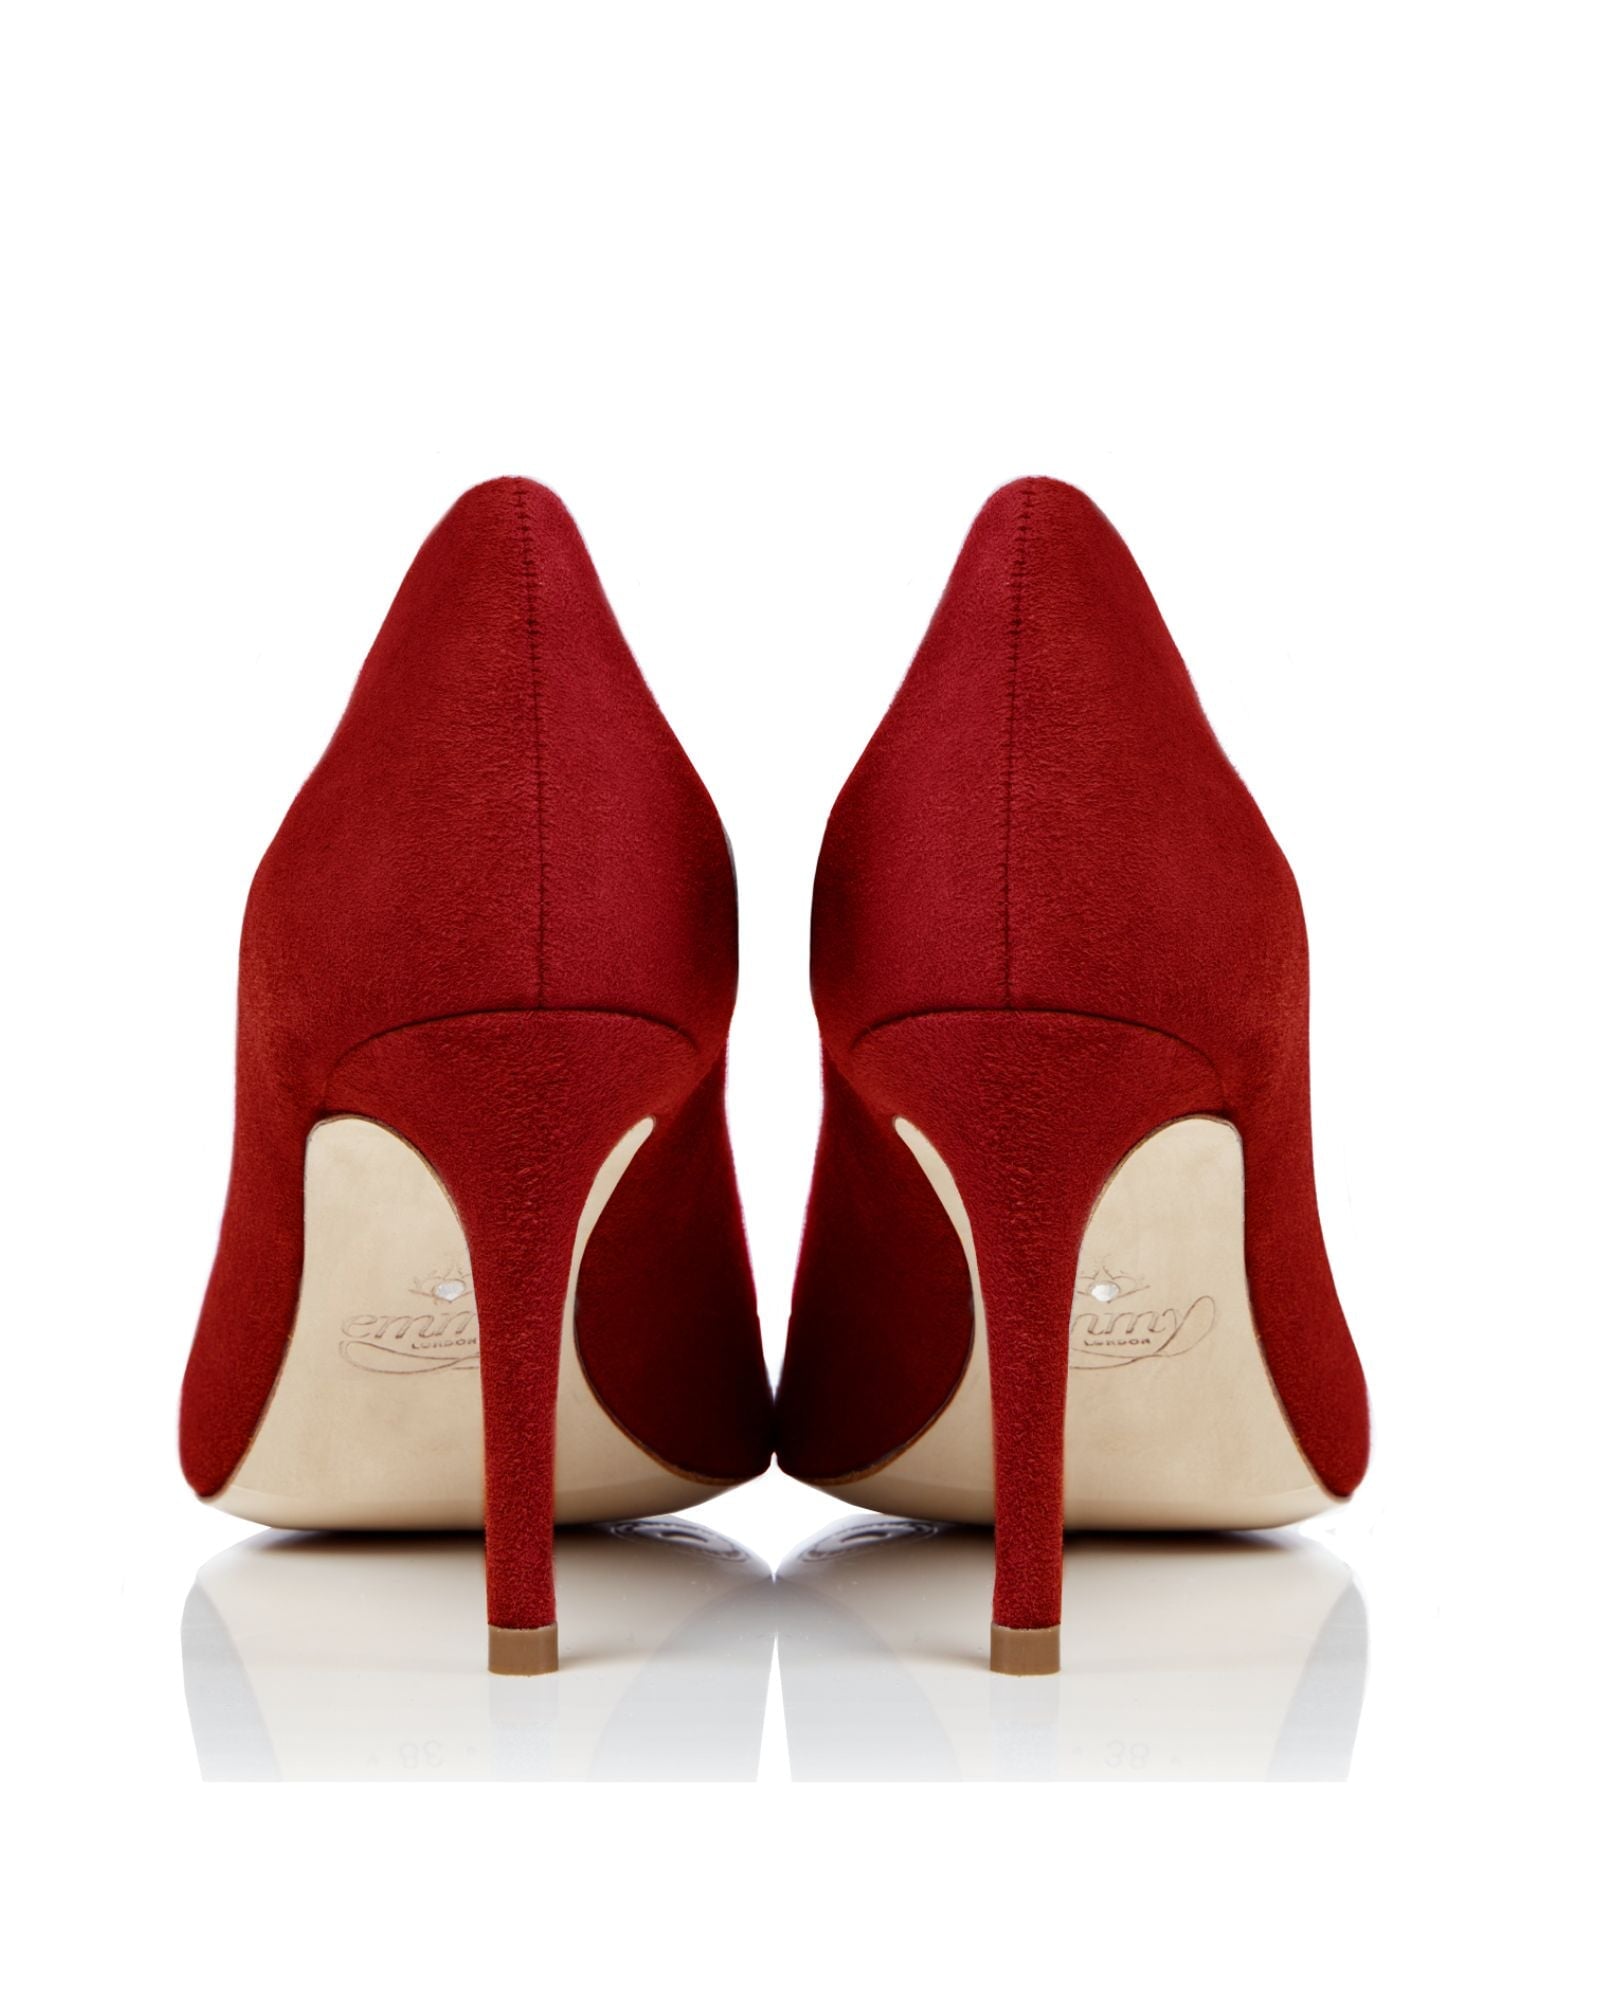 Claudia Mid Heel Fashion Shoe Bright Red Pointed Court Shoe  image